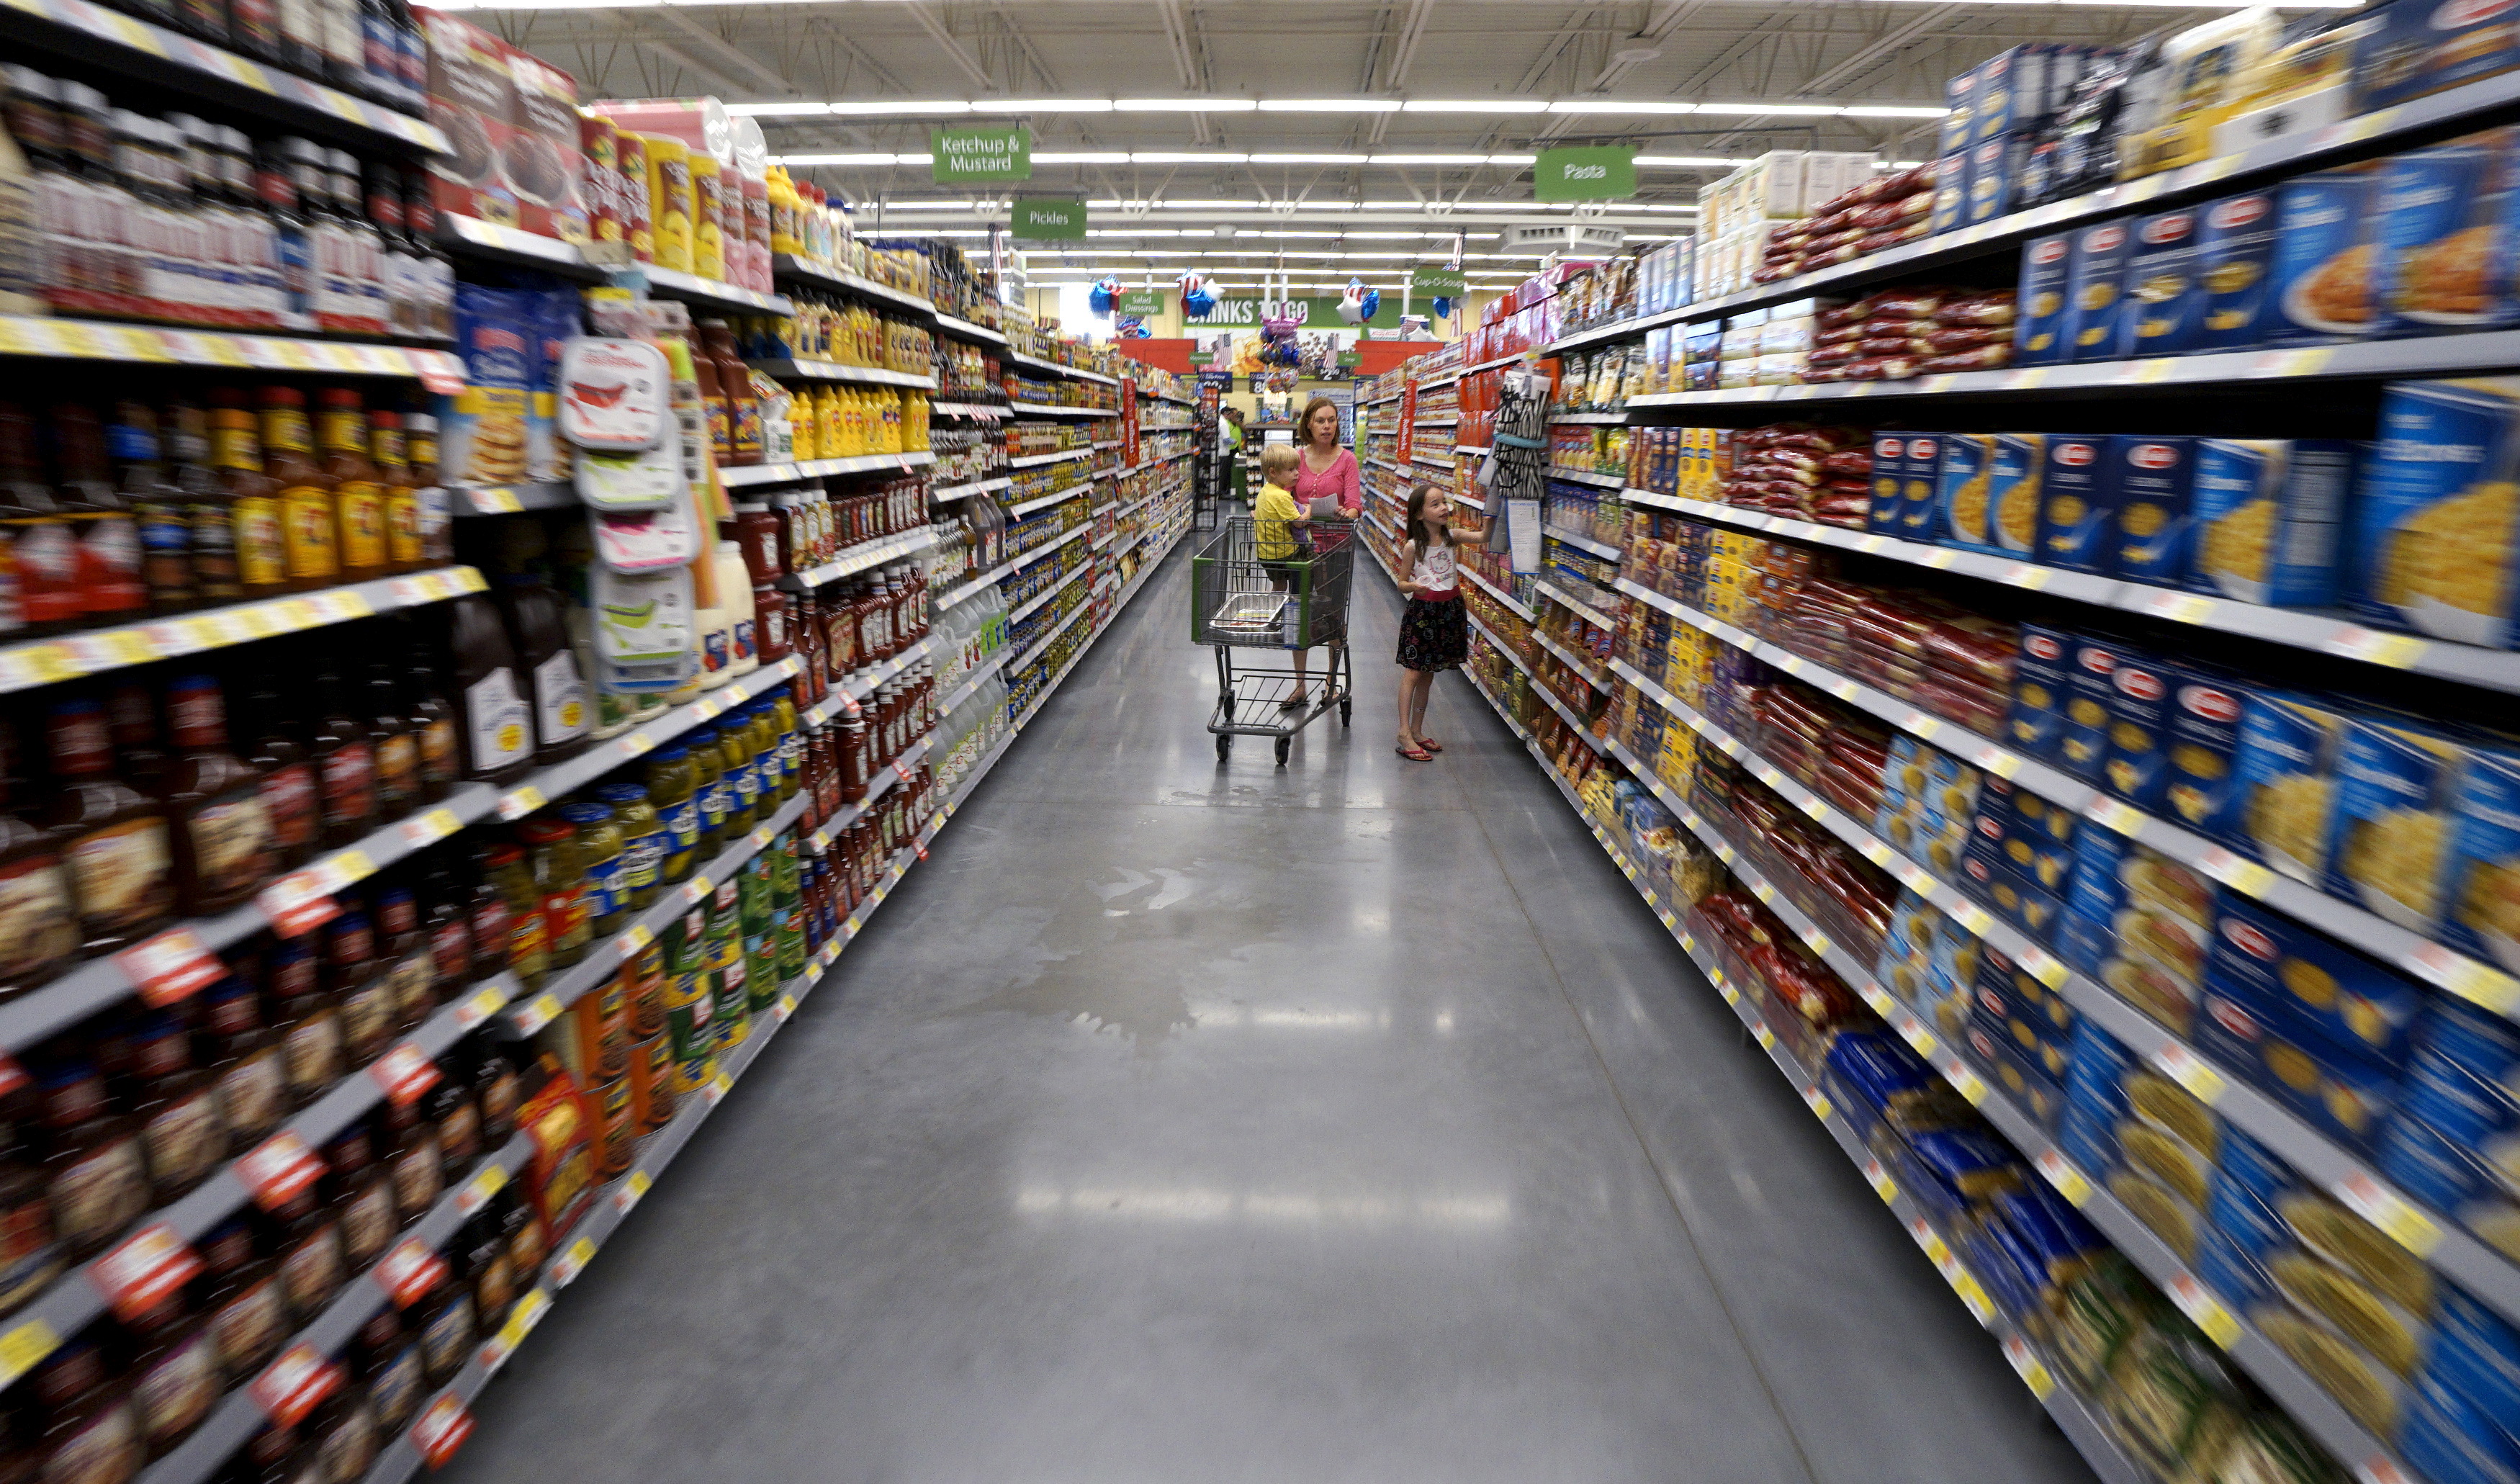 A family shops in Bentonville, Arkansas in a file photo.  REUTERS/Rick Wilking  